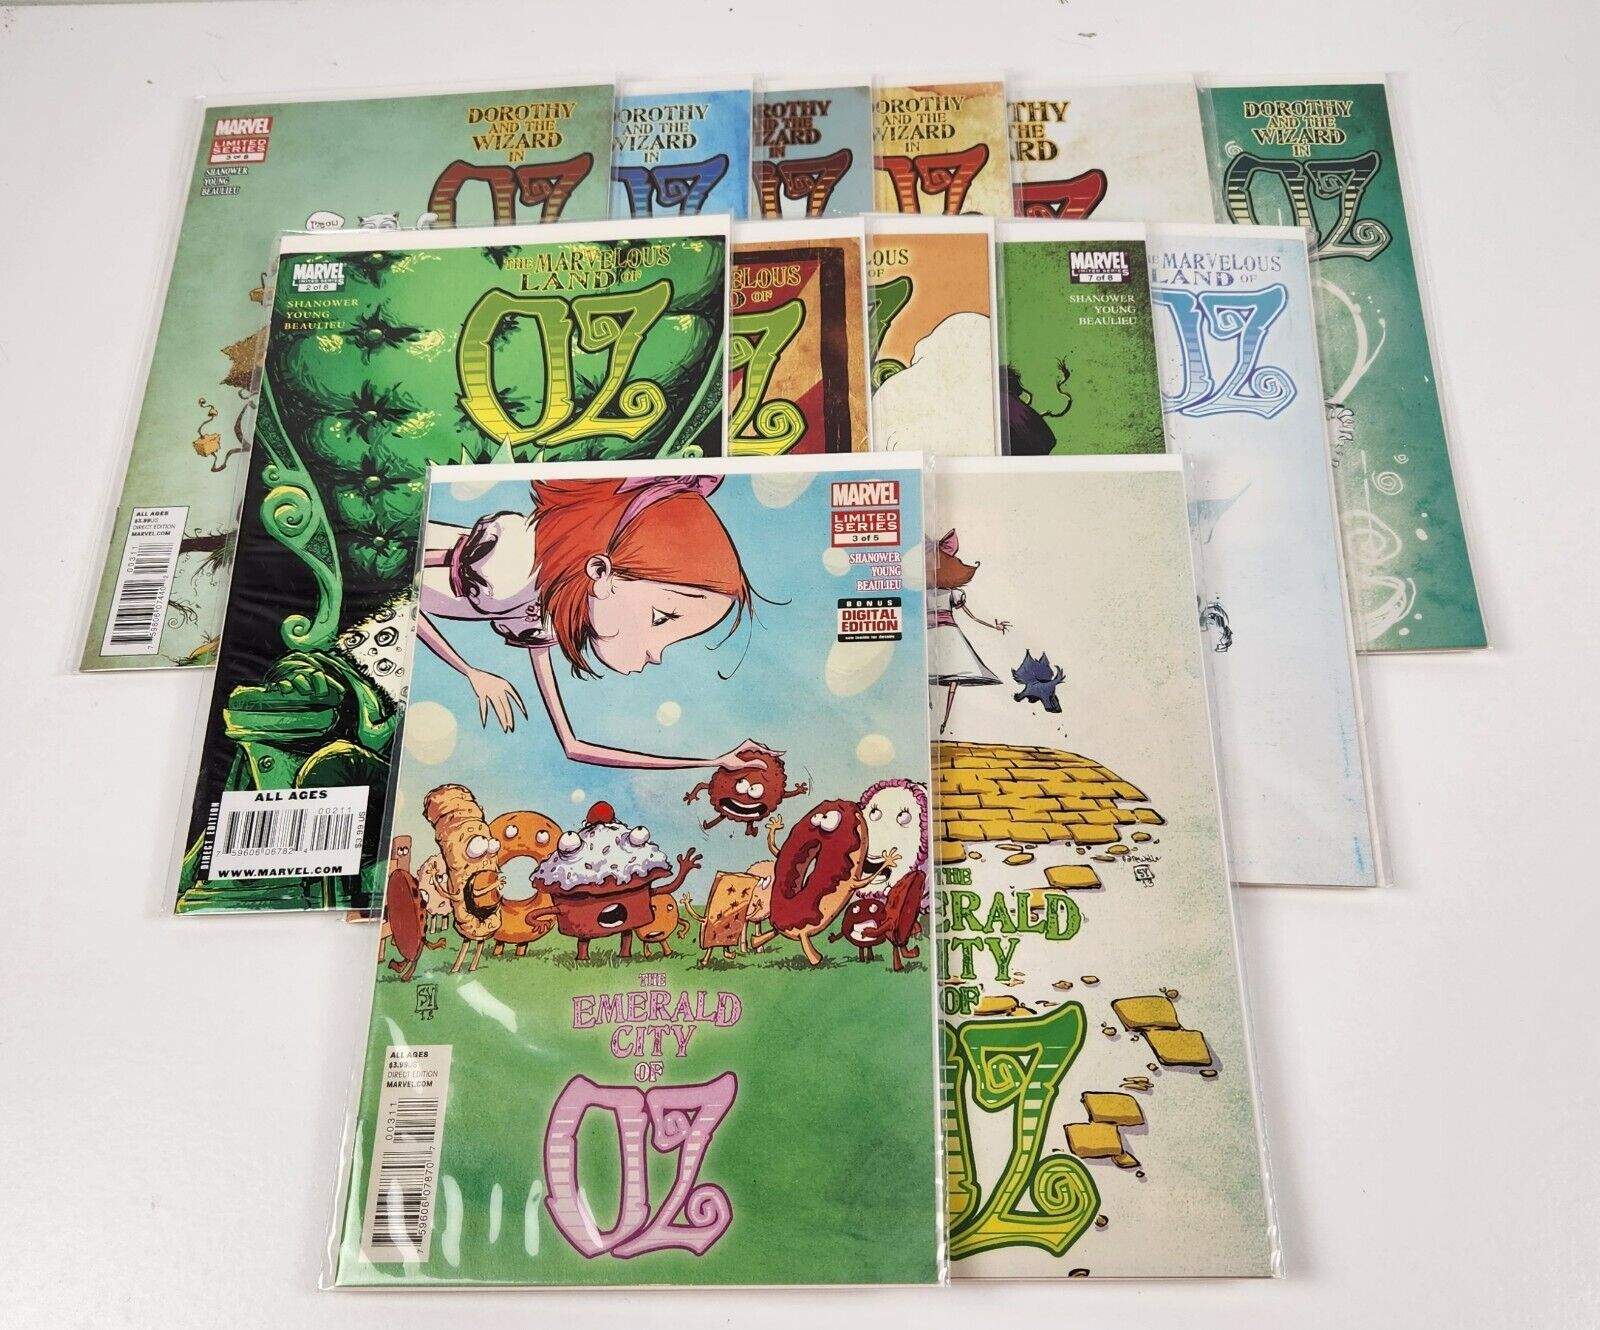 Dorothy and the Wizard in Oz (Marvel 2011) #3-8, The Marvelous Land of Oz, more